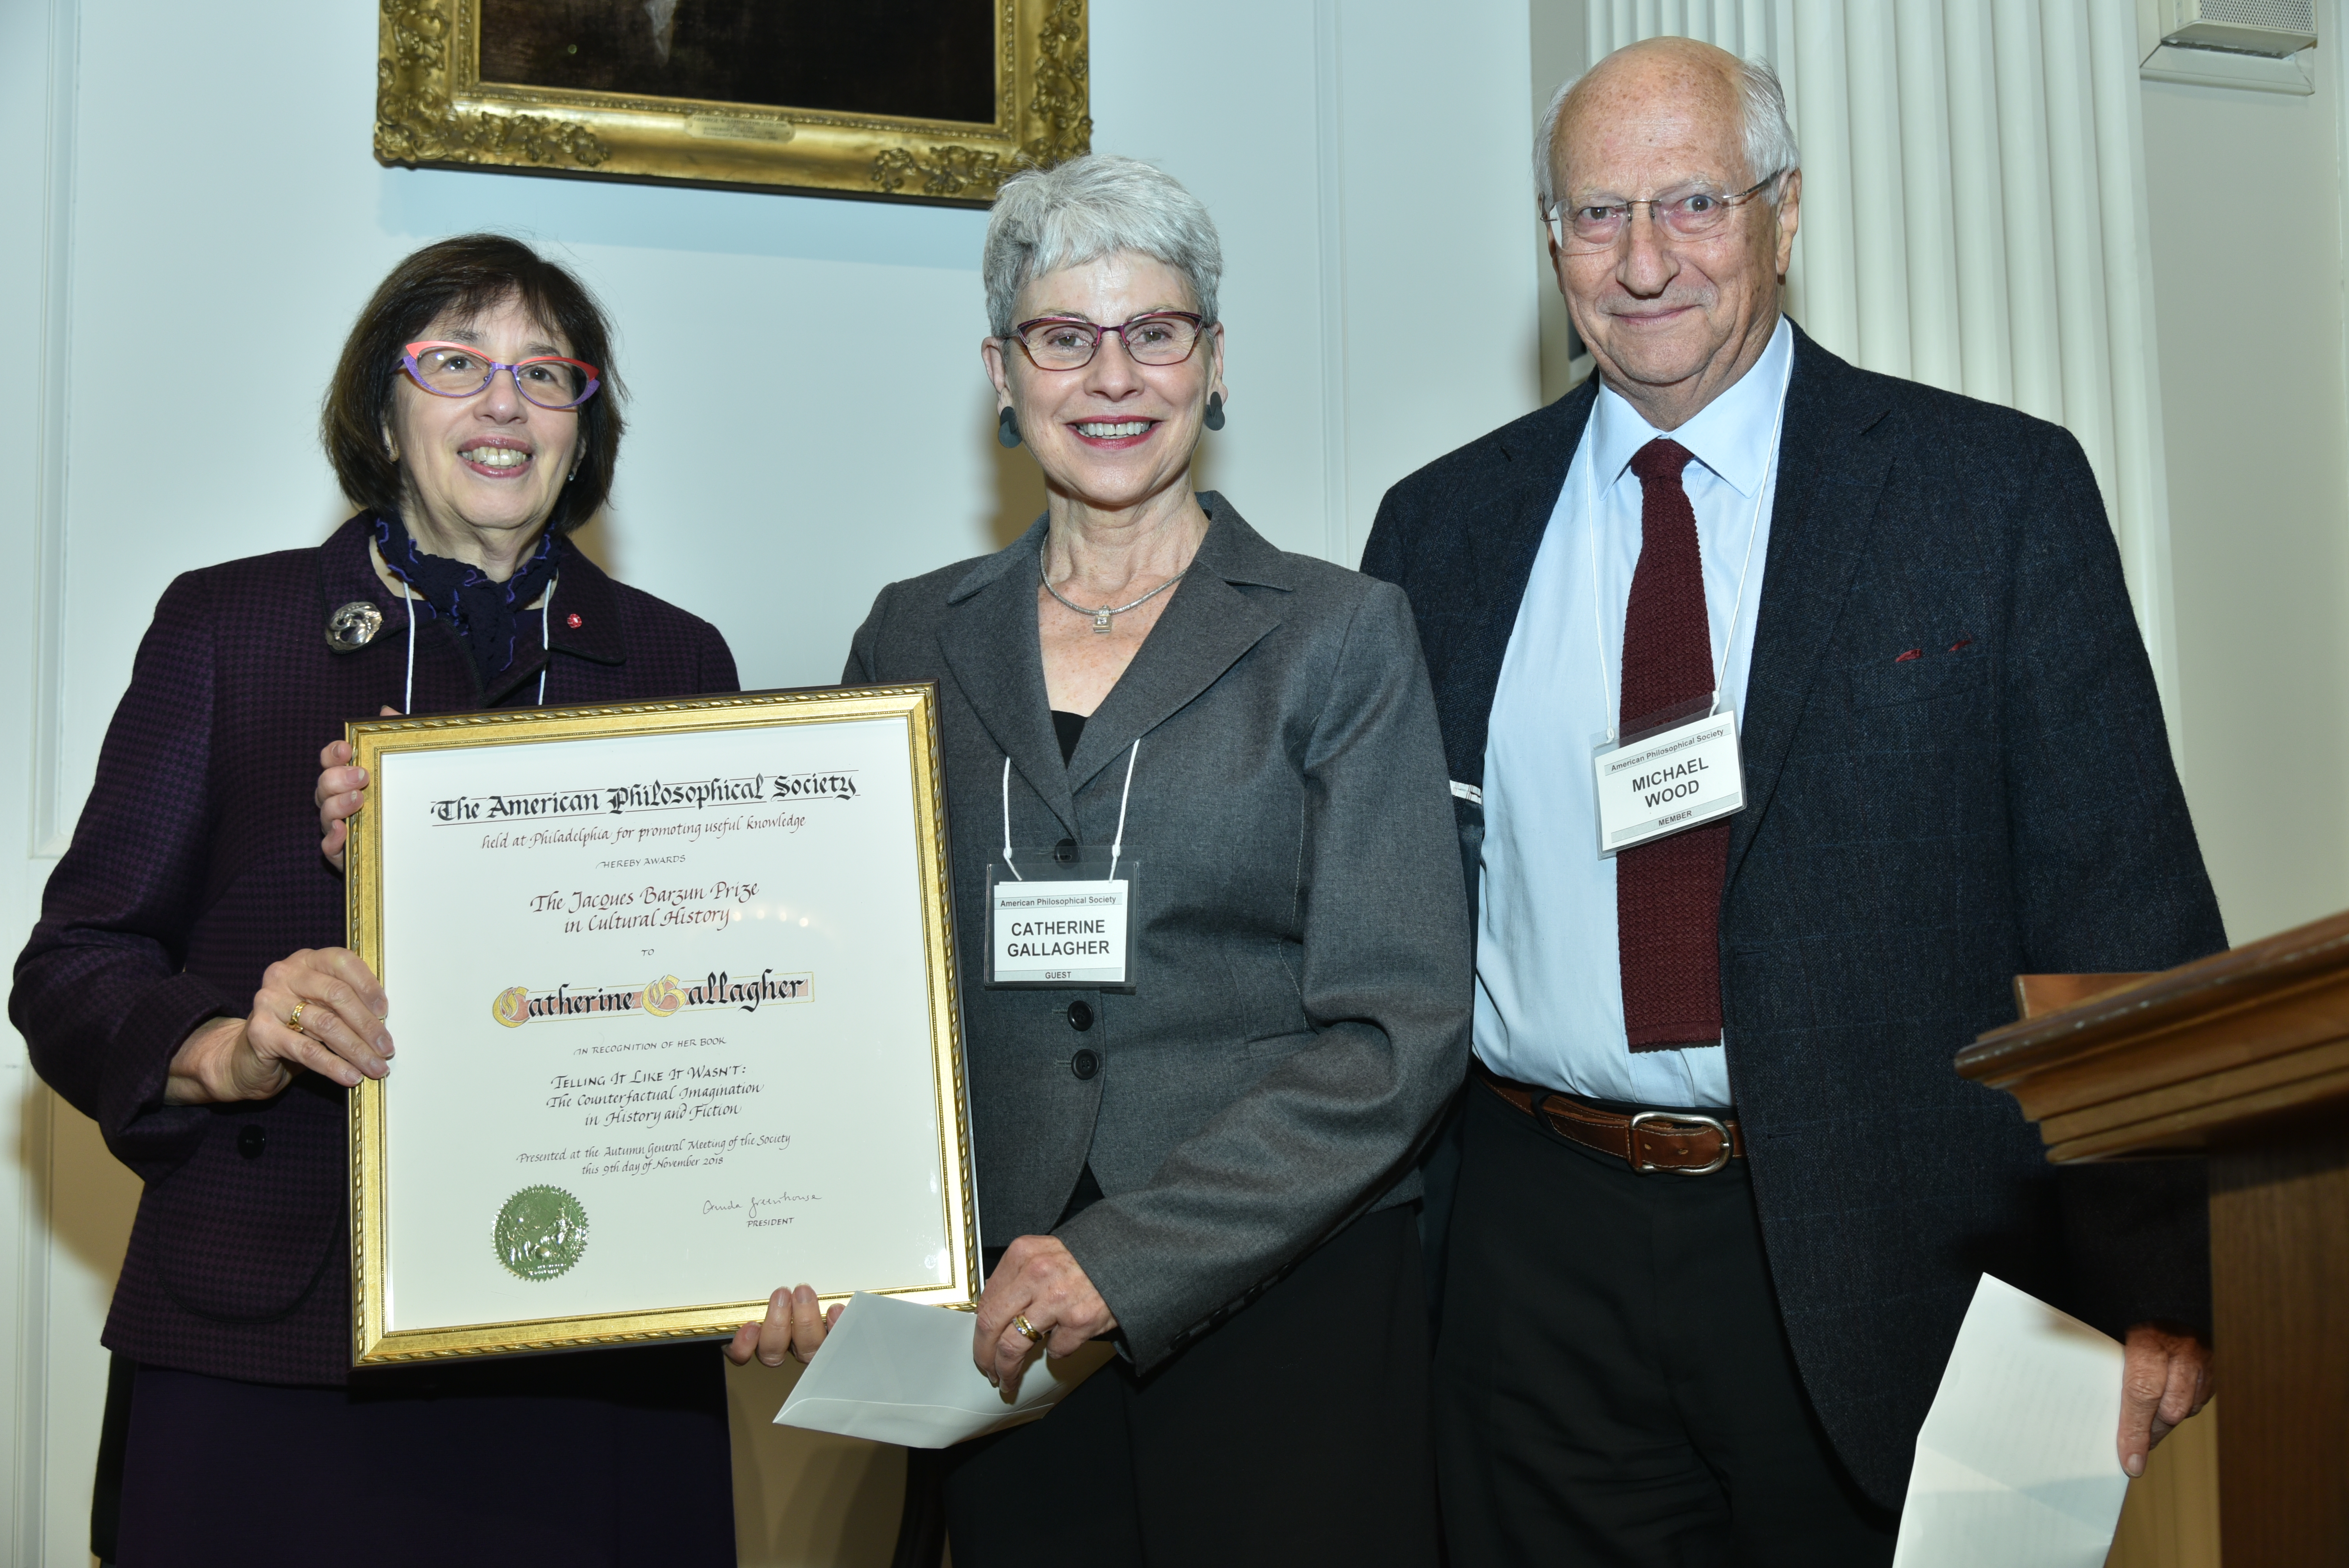 APS president Linda Greenhouse (left) and prize committee chair Michael Wood (right) present the prize to Catherine Gallagher (center) 